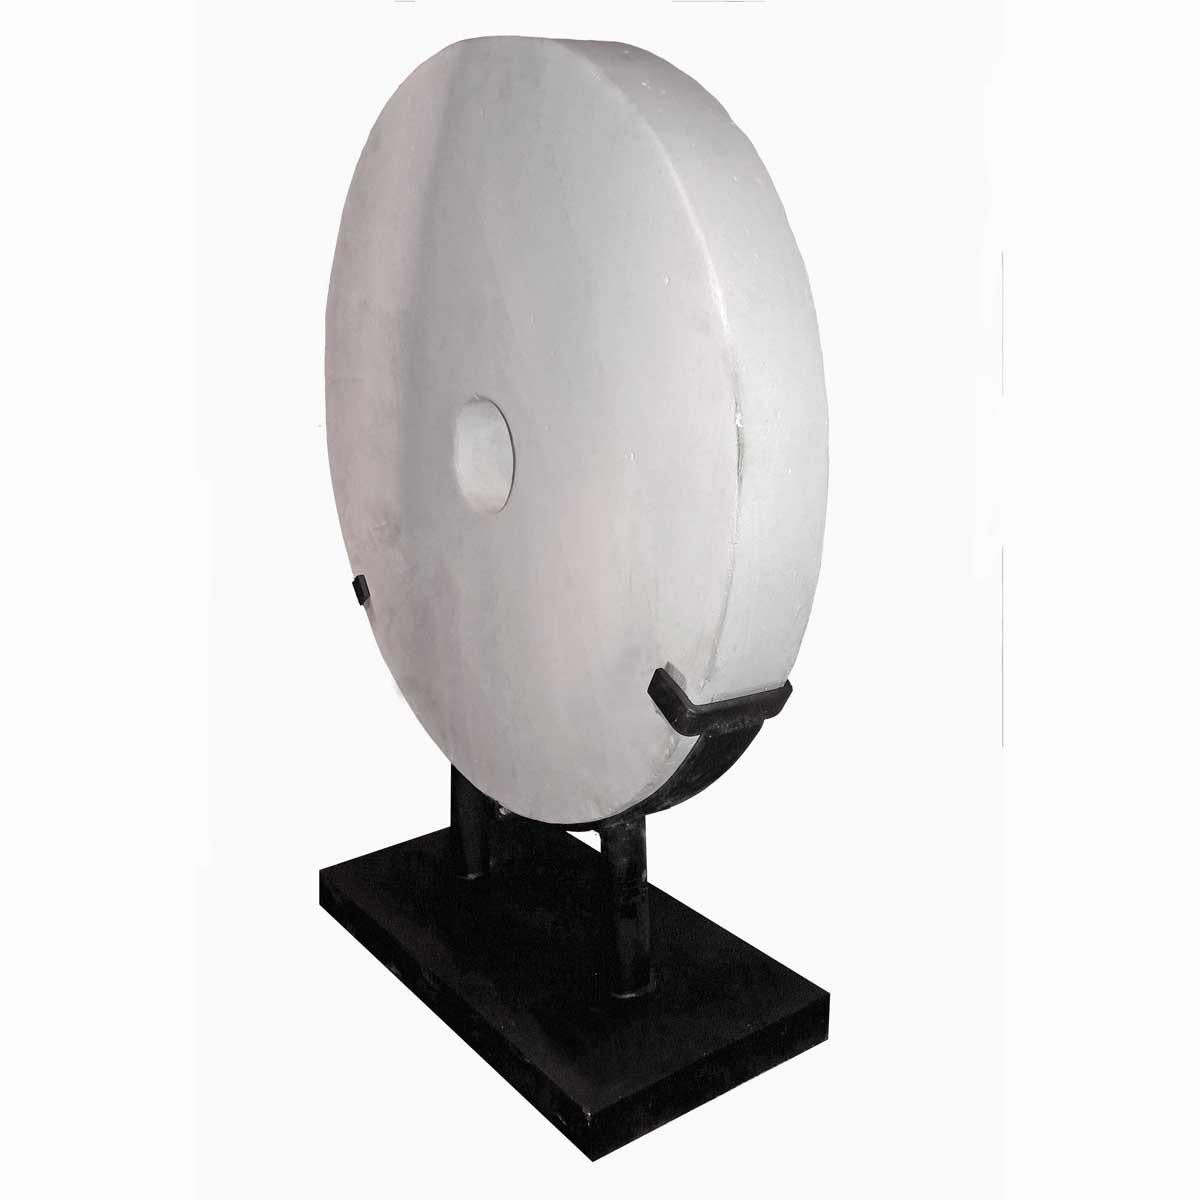 A white stone wheel from Indonesia. Mounted in a black metal stand. Its clean, simple lines make this stone coin a great accent to a minimalist decor.